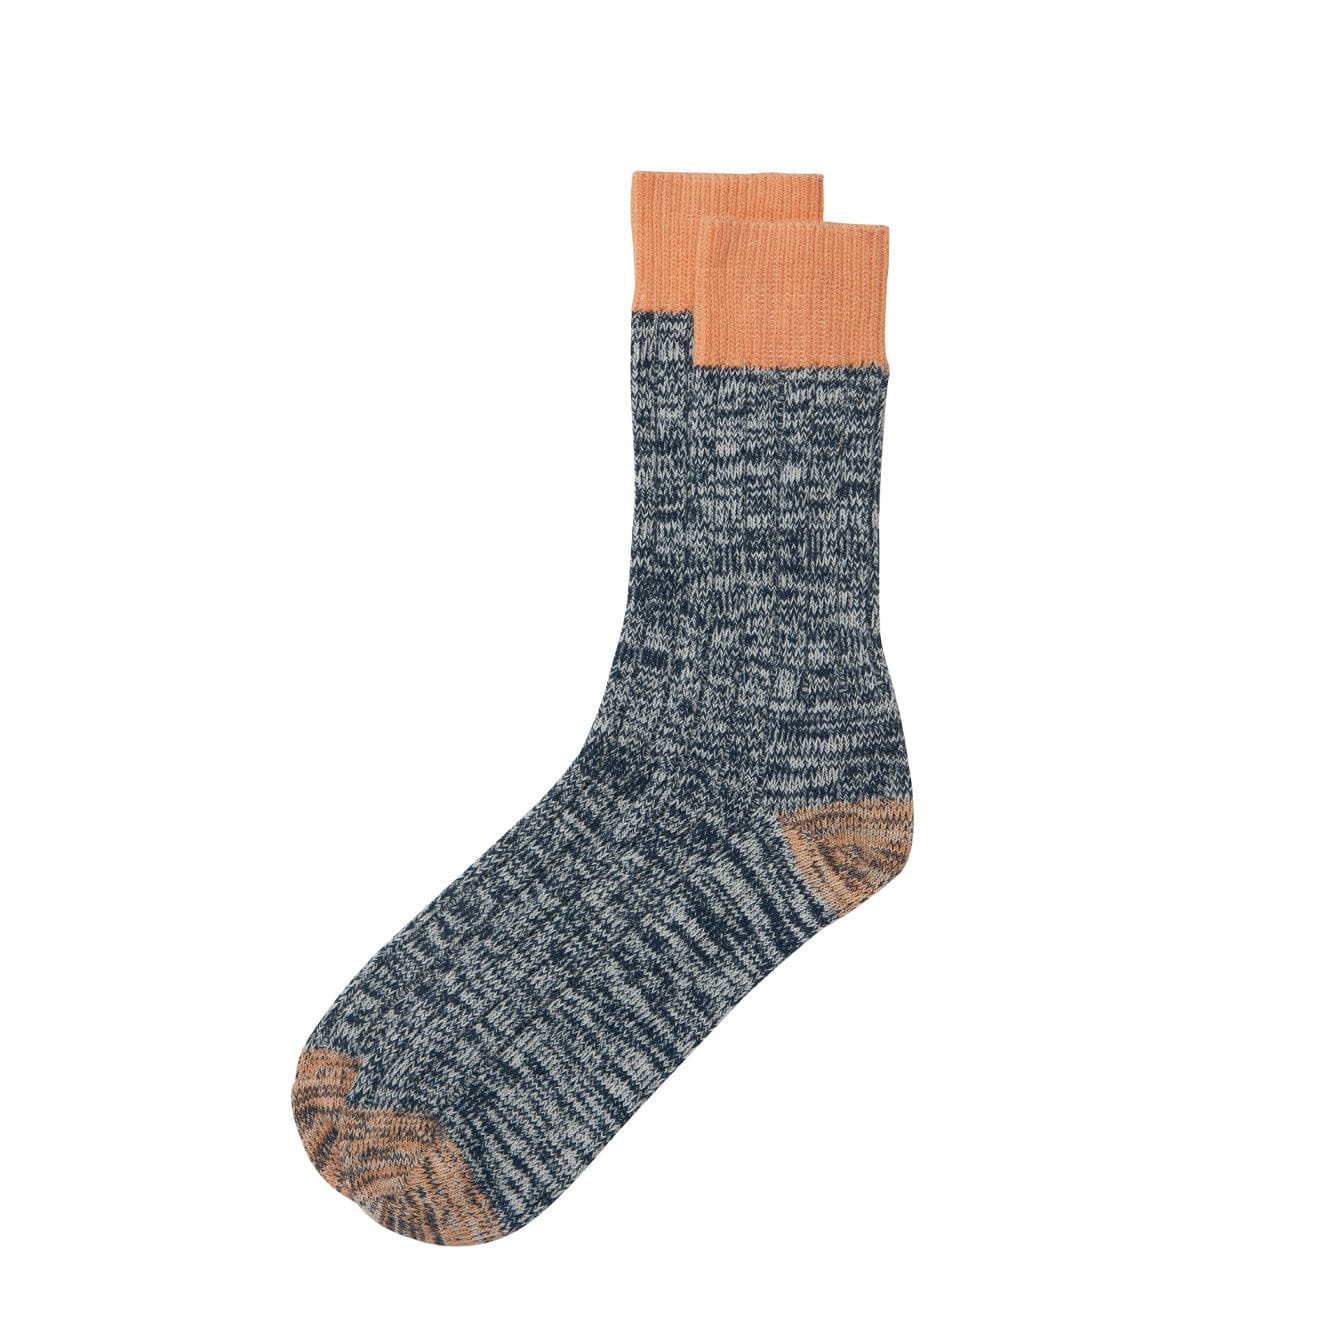 Barbour Twisted Contrast Socks Navy Mix | The Sporting Lodge